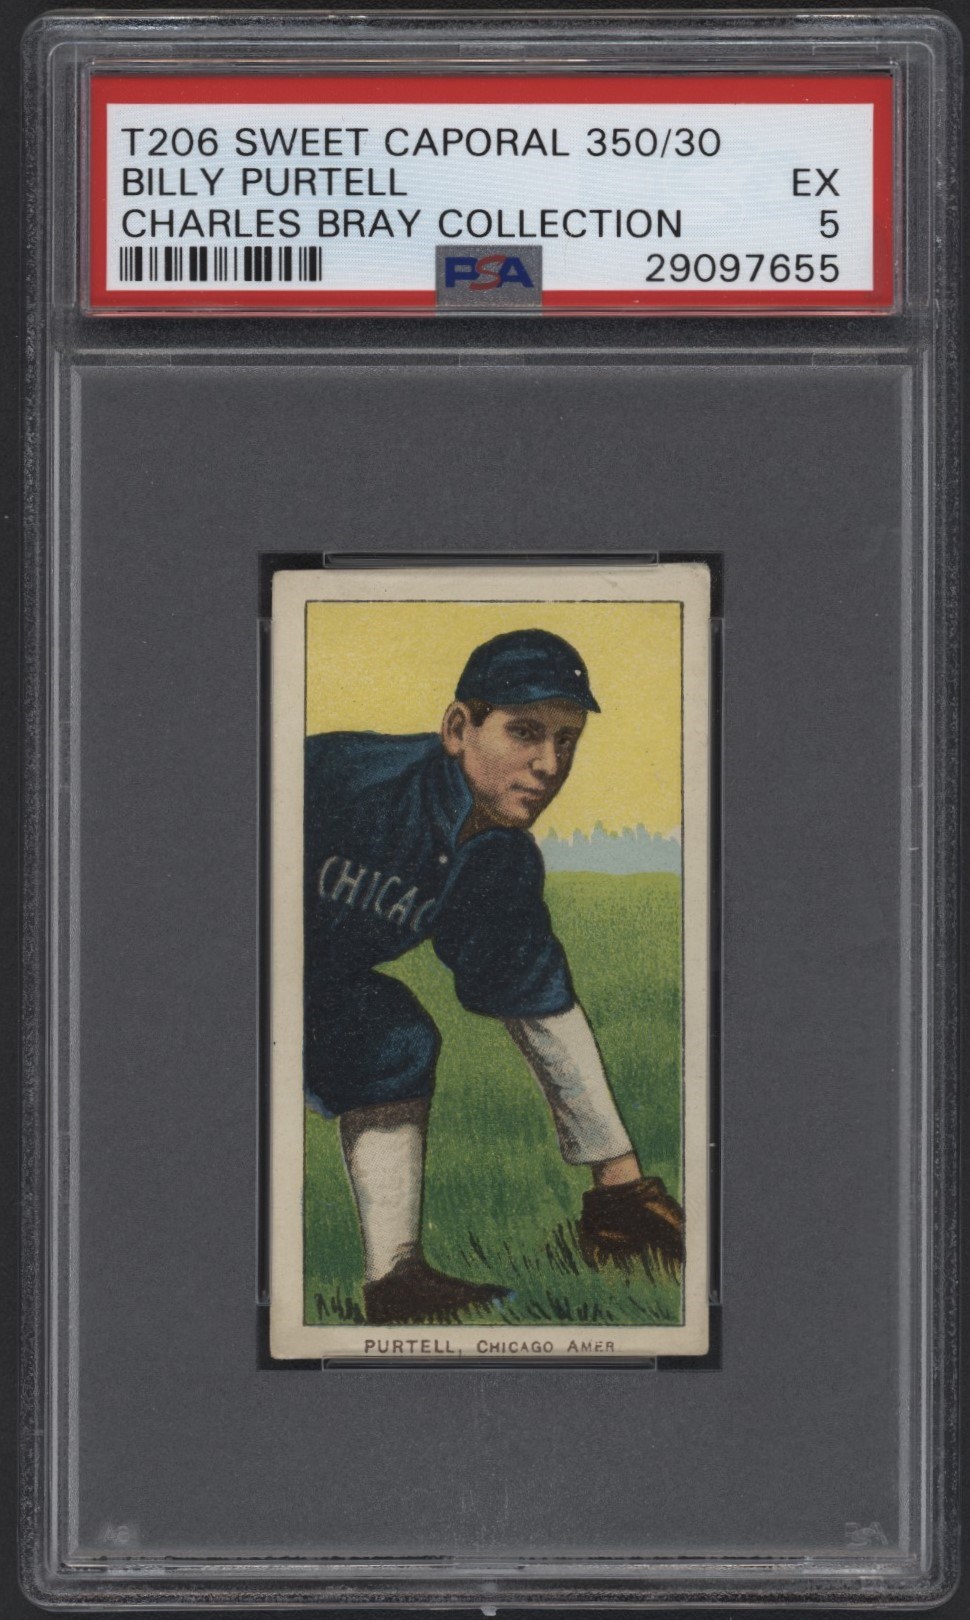 T206 Sweet Caporal 350/30 Billy Purtell PSA EX 5 From the Charles Bray Collection